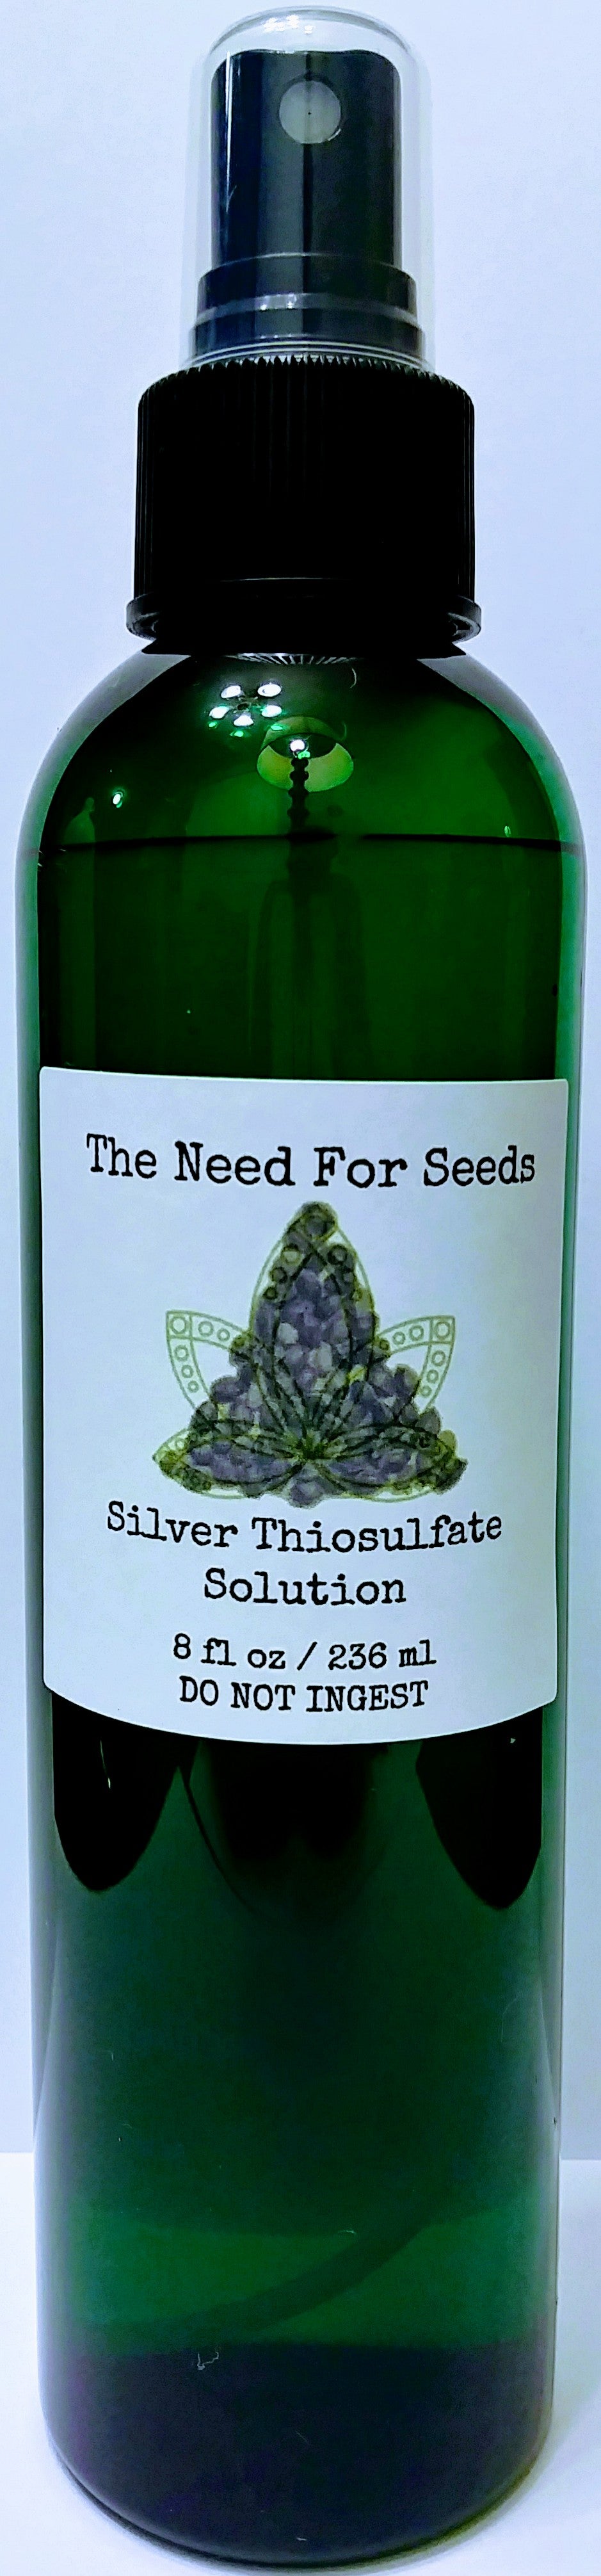 The Need For Seeds: Silver Thiosulfate Solution